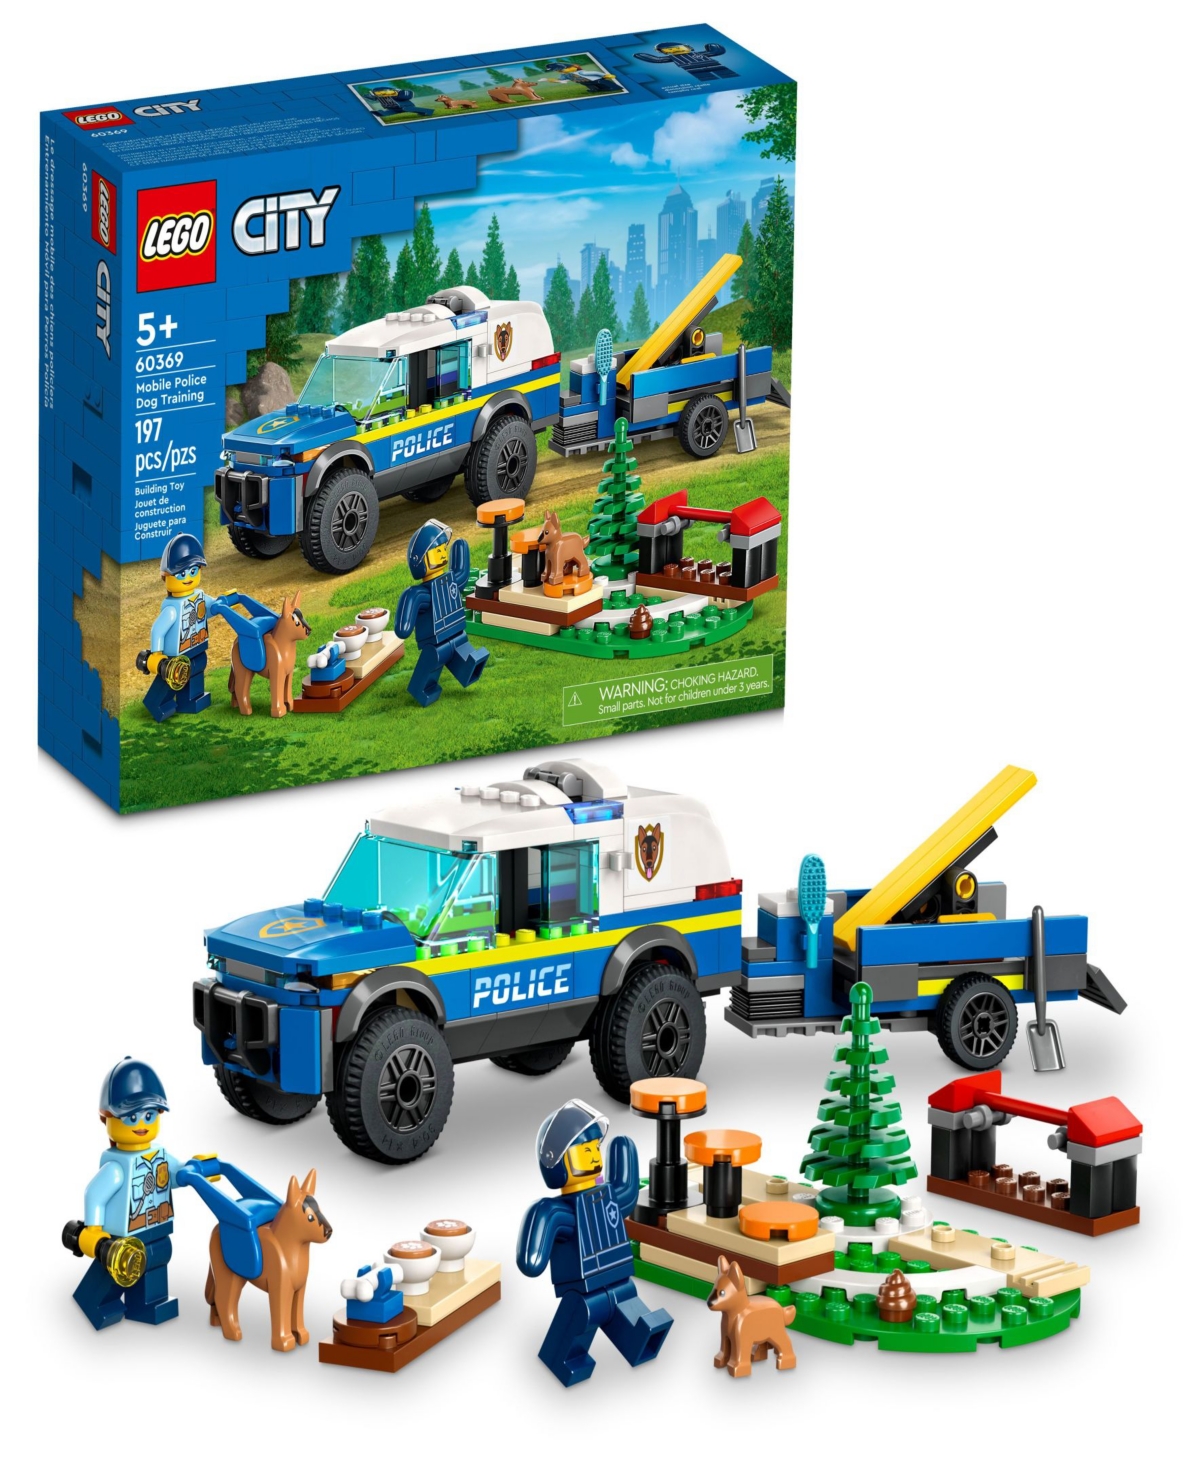 Lego City Police Mobile Police Dog Training 60369 Toy Building Set With 2 Police Minifigures And 2 Dog Fi In Multicolor